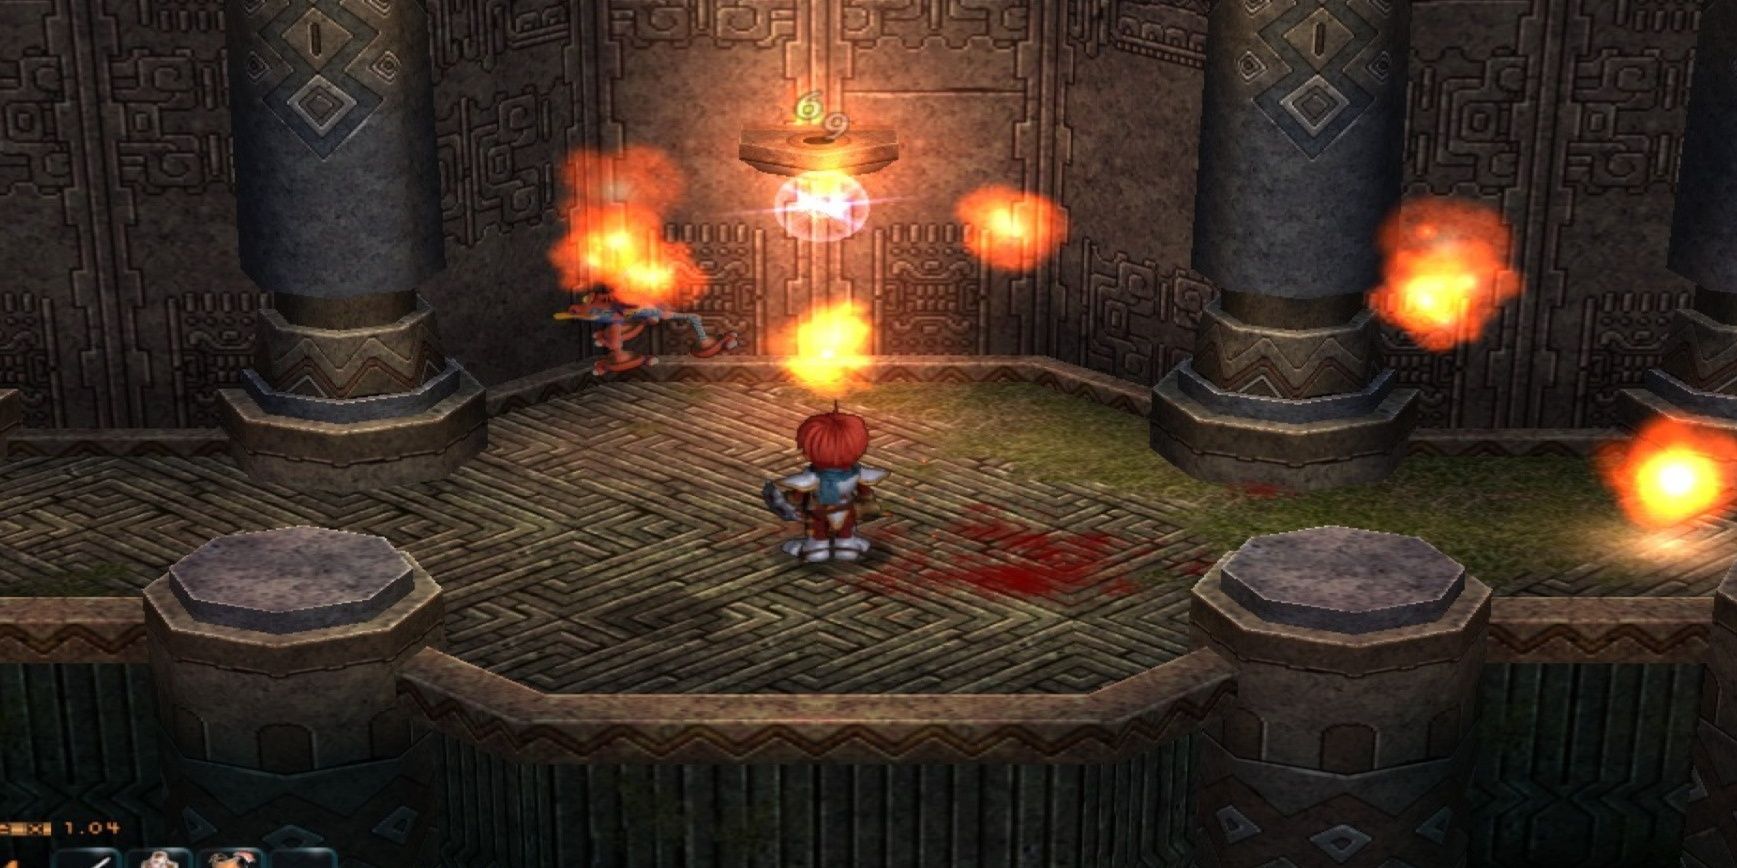 Ys Oath of Felghana Adol inside dungeon with fire